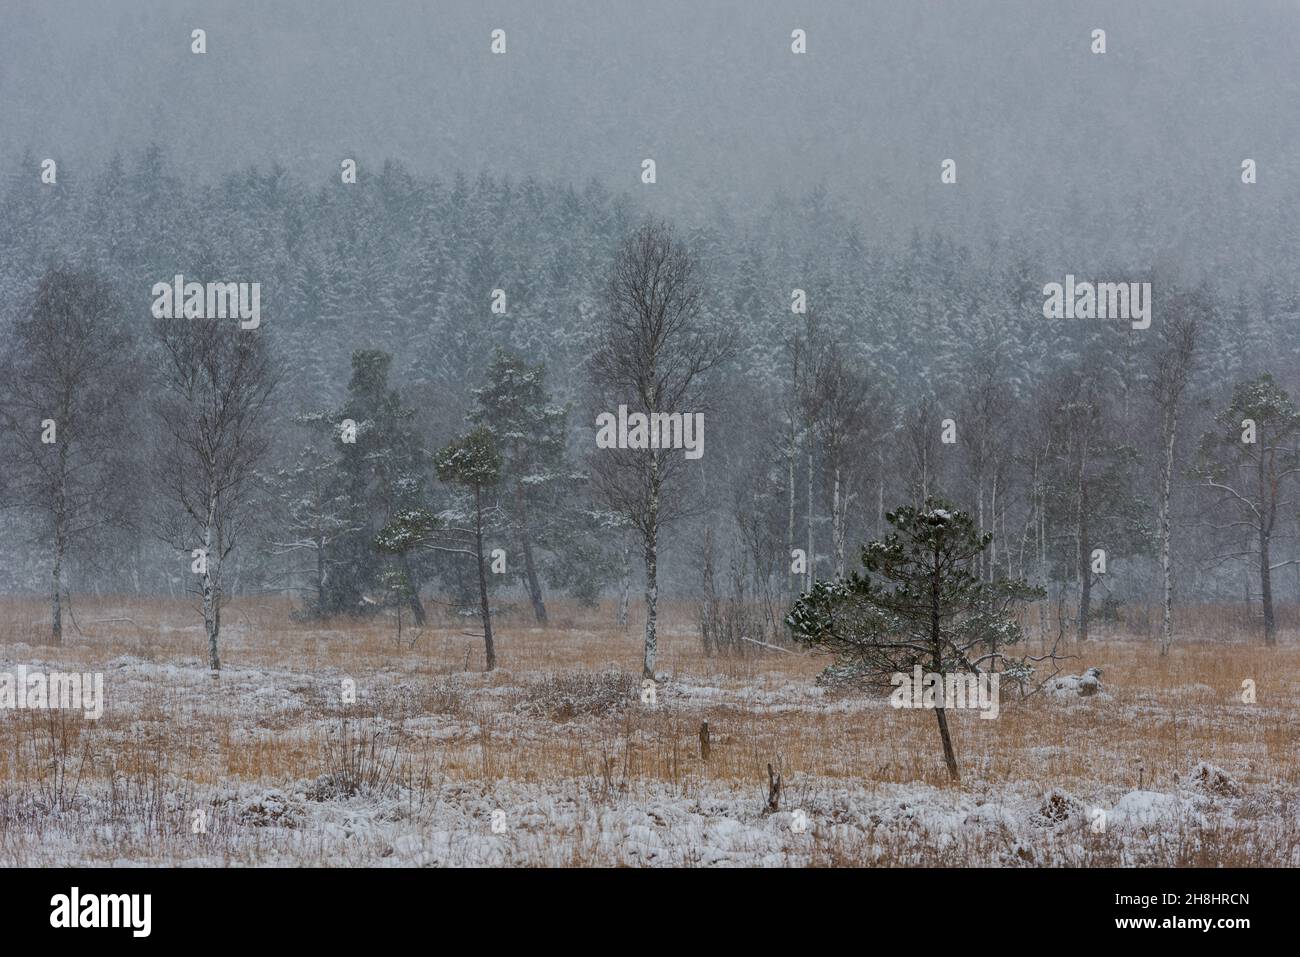 Nature studies path leading through carbon dioxide storing moor and peatland in Bavaria in winter with snow-covered landscape and trees Stock Photo